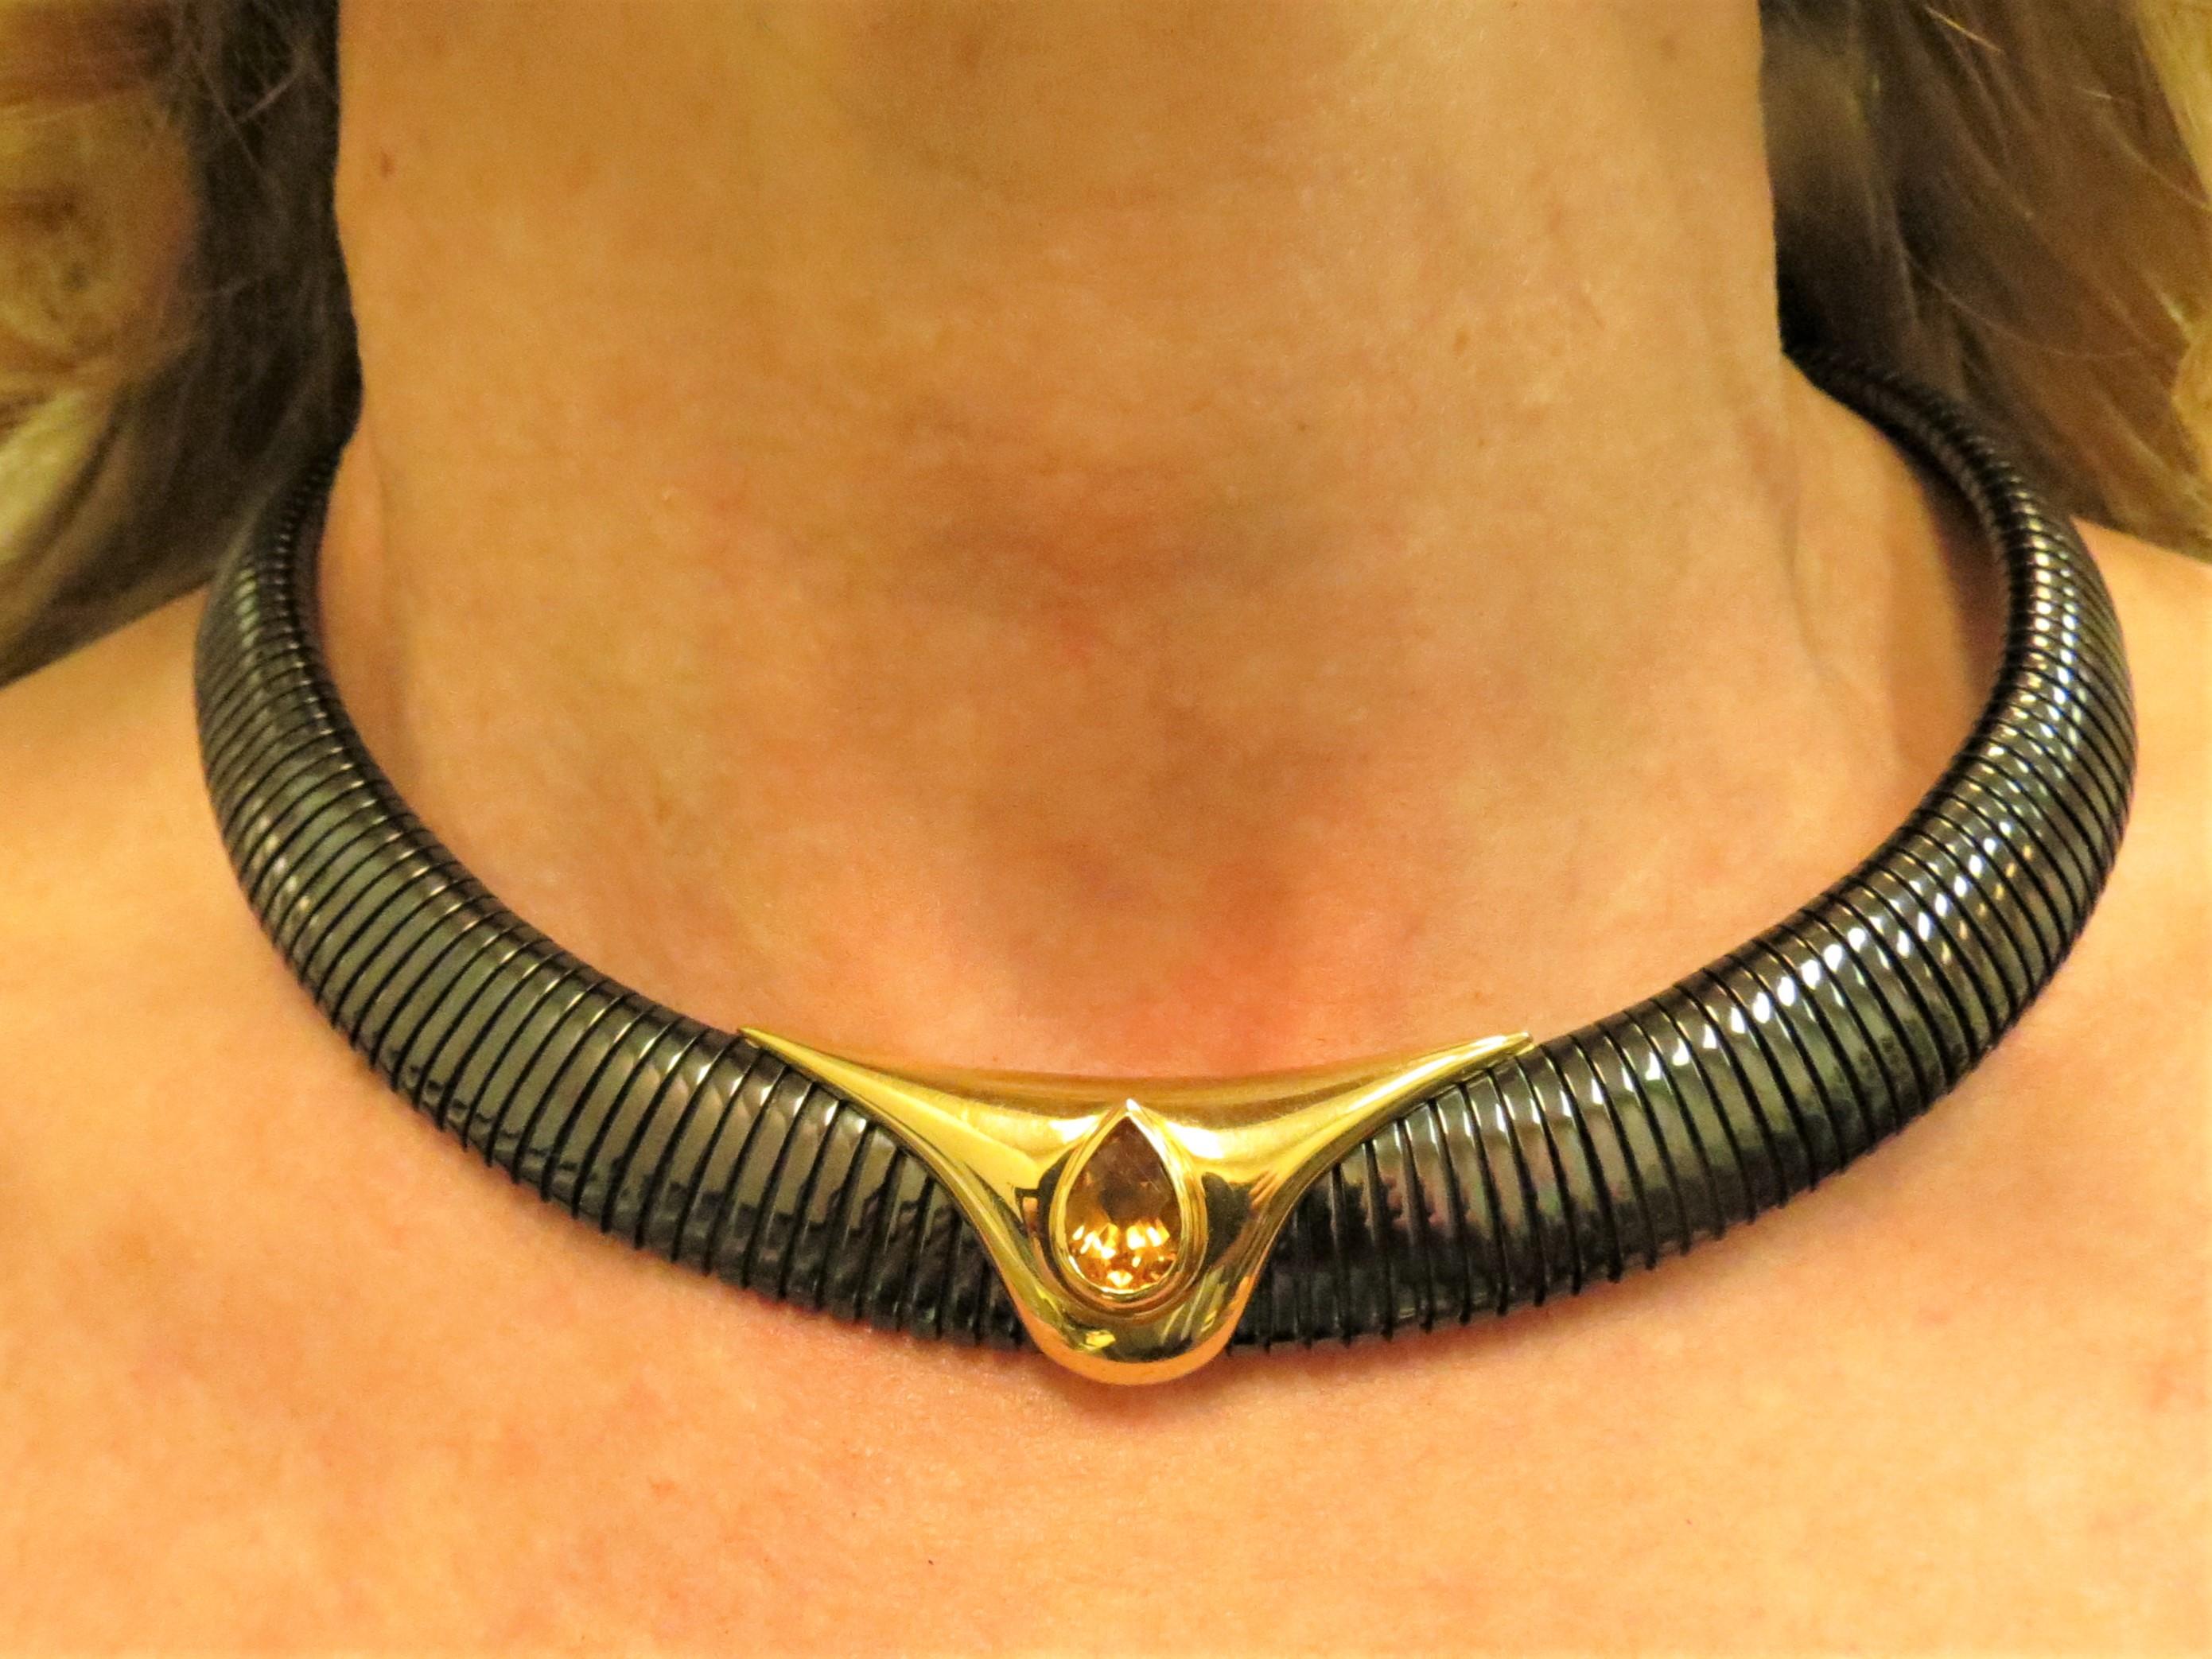 Anodized ribbed steel necklace which is flexible but conforms to the neck with 18 K yellow gold overlay, bezel set in center with 4.01ct pear shape faceted Citrine
Last retail. $3500